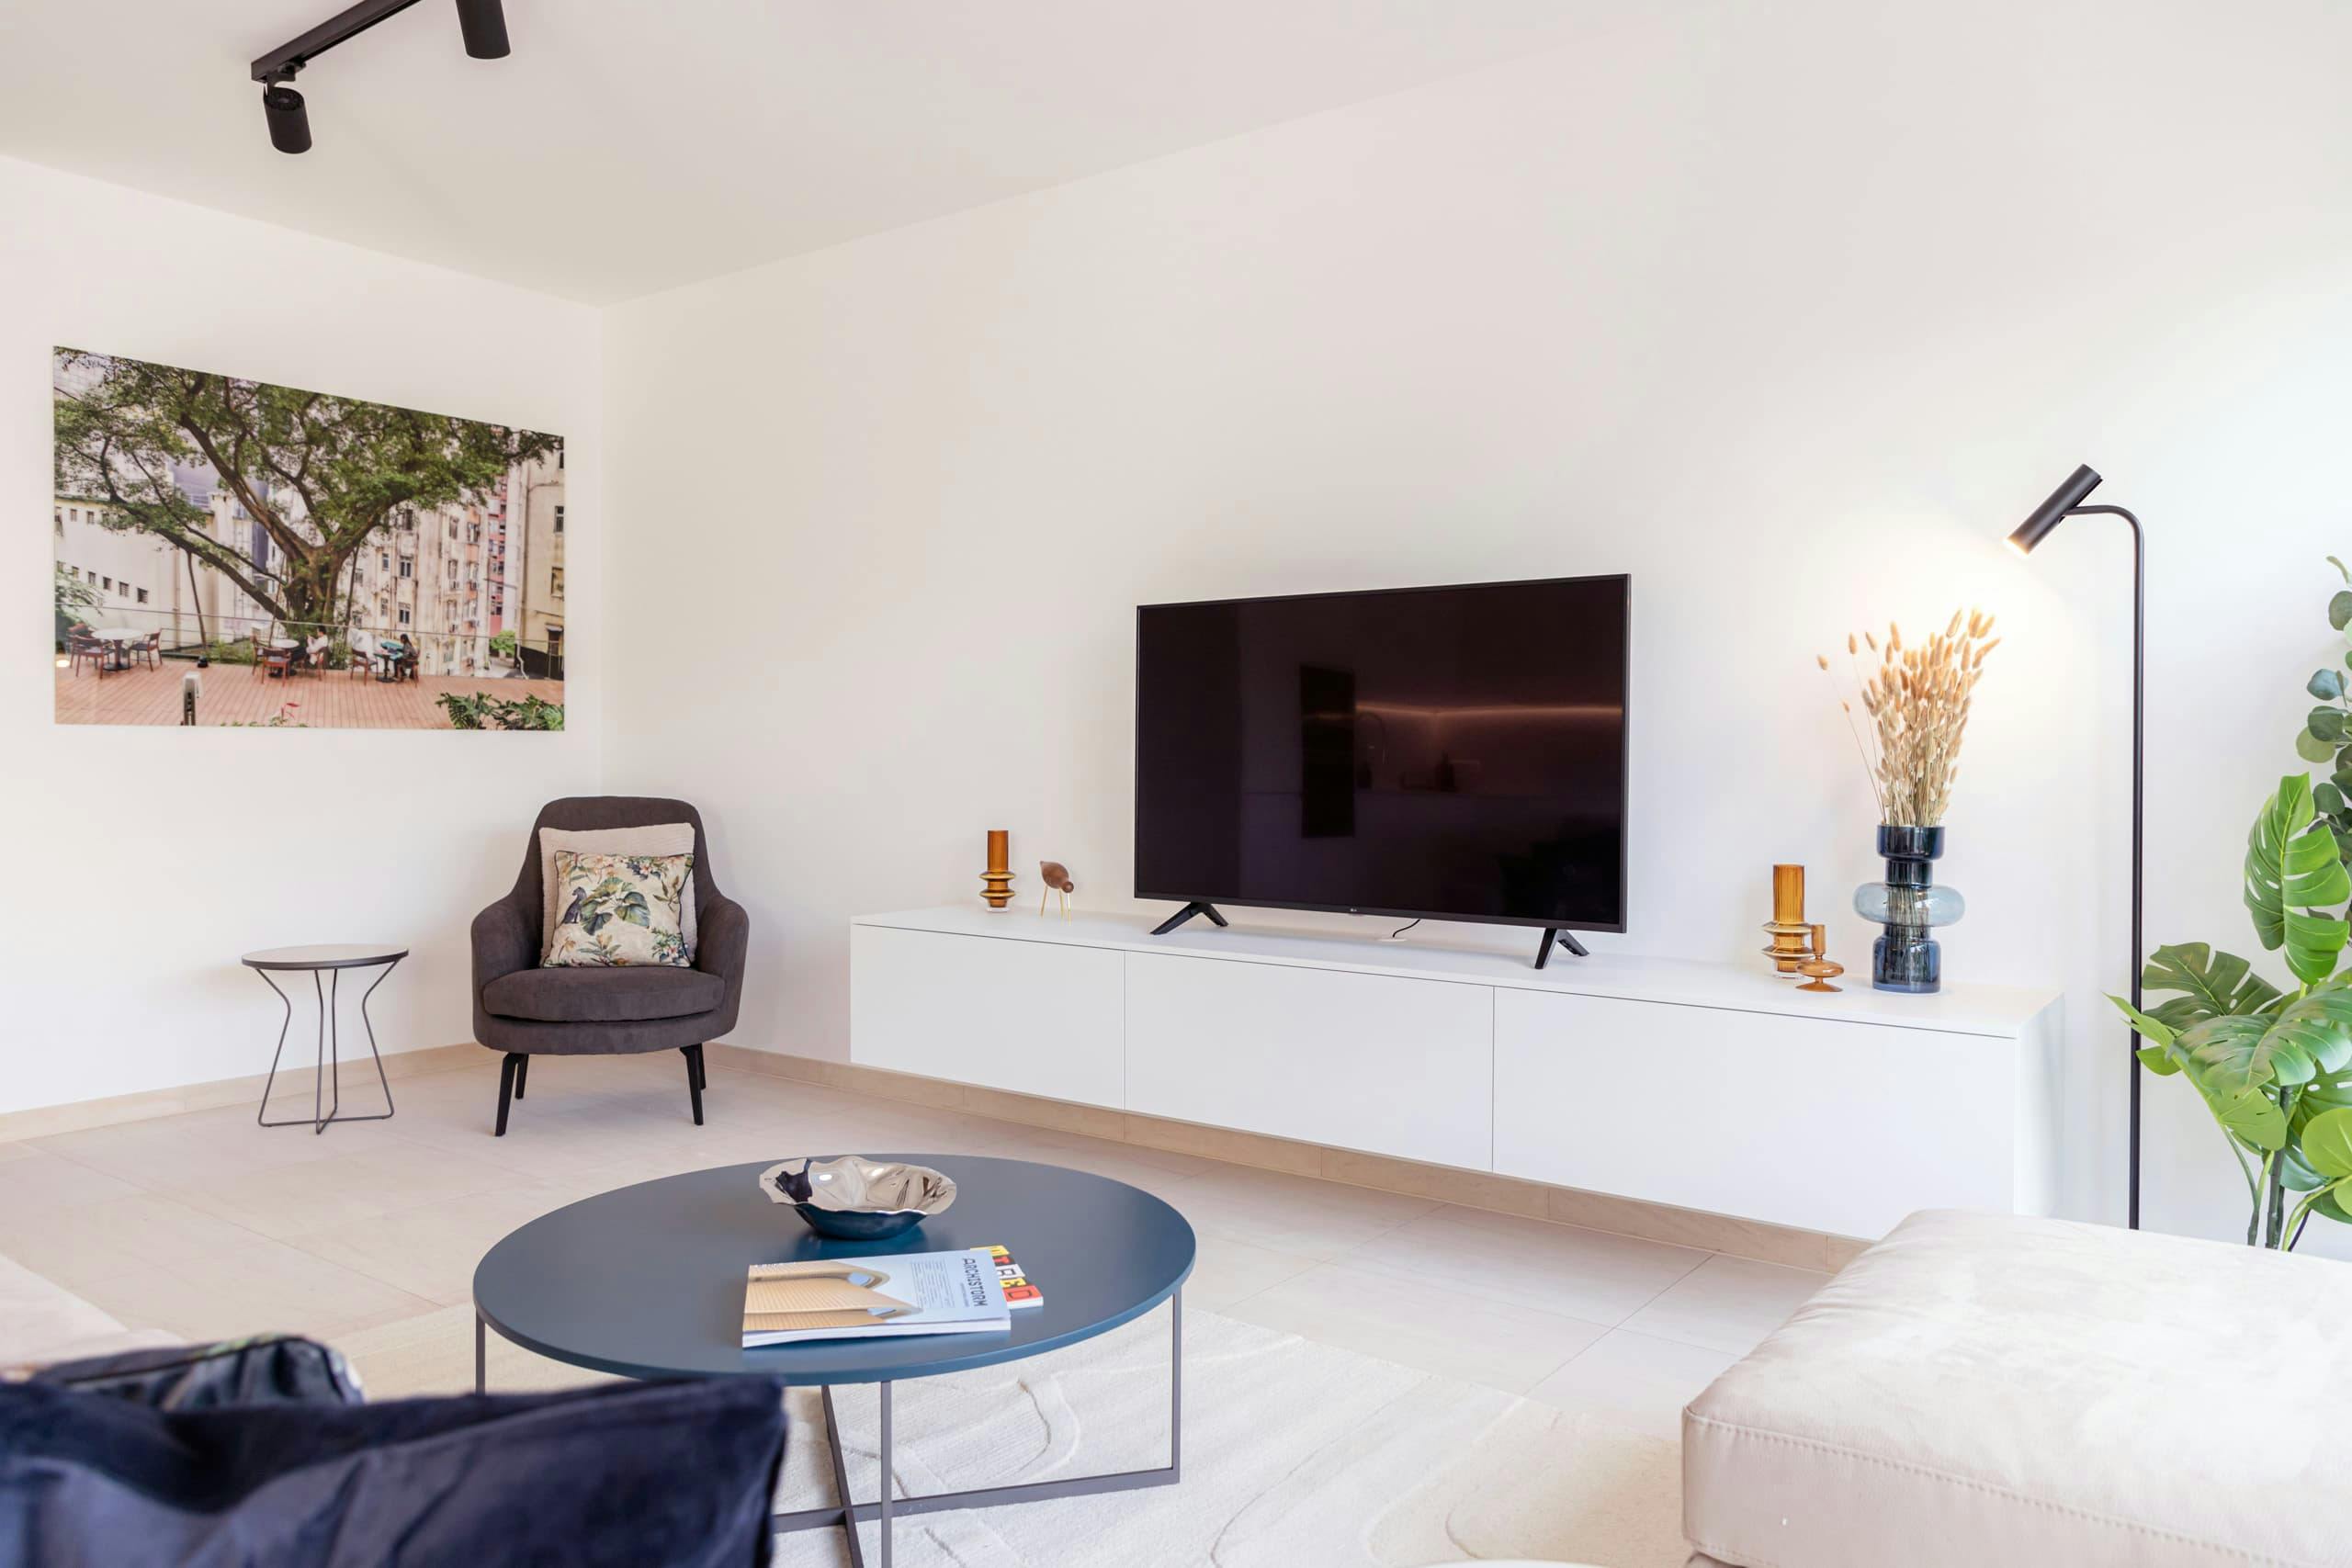 Living area of Apartment Alzette at Hamilius Apartments showing an armchair, television unit with smart TV and vases with dried flowers.